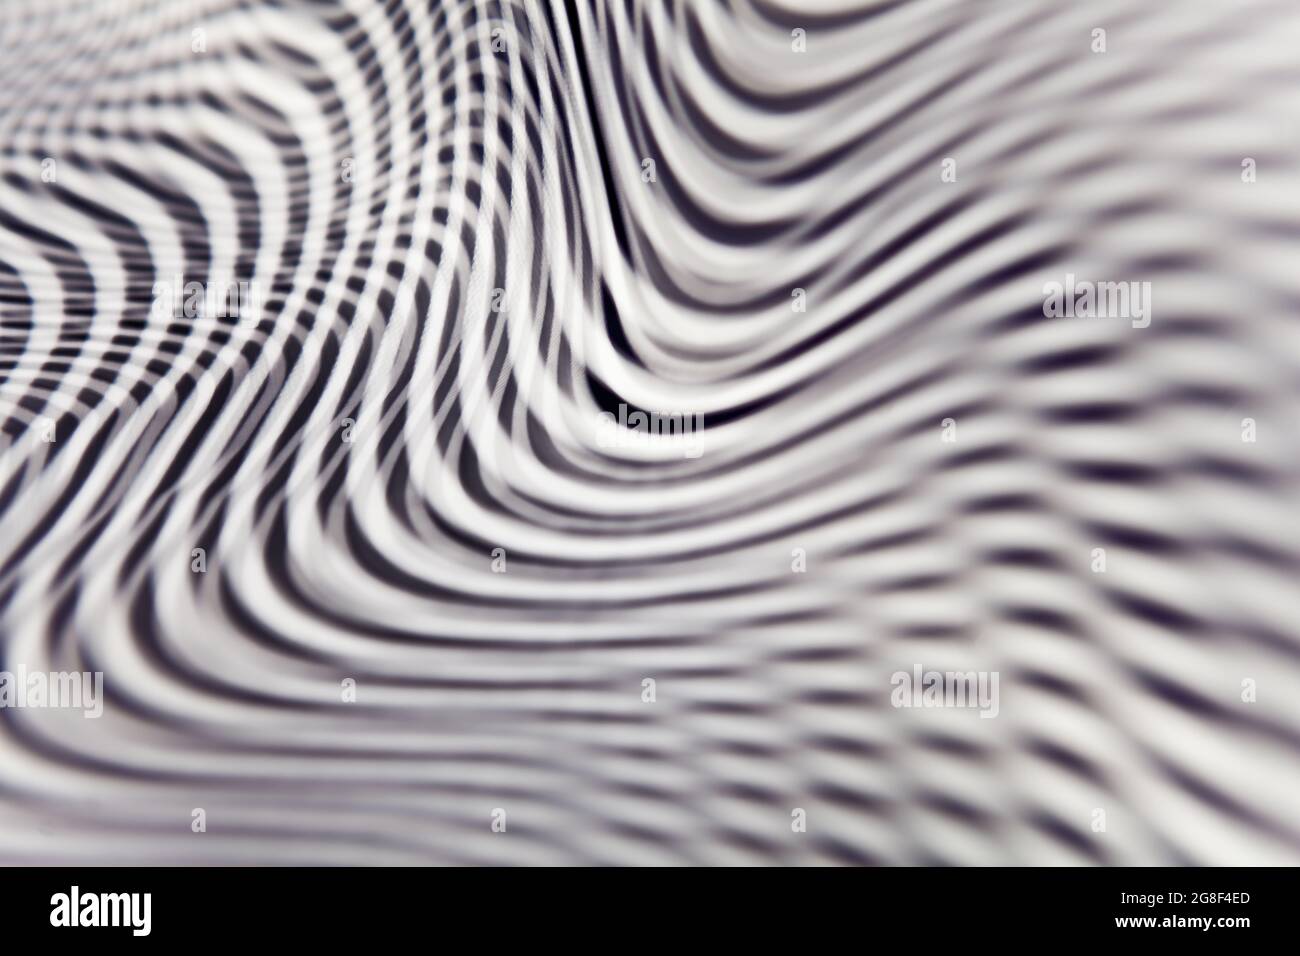 Geometric striped abstract optical illusion, pattern. Black and white vibrant parallel curves, web background. Multi exposure. Stock Photo